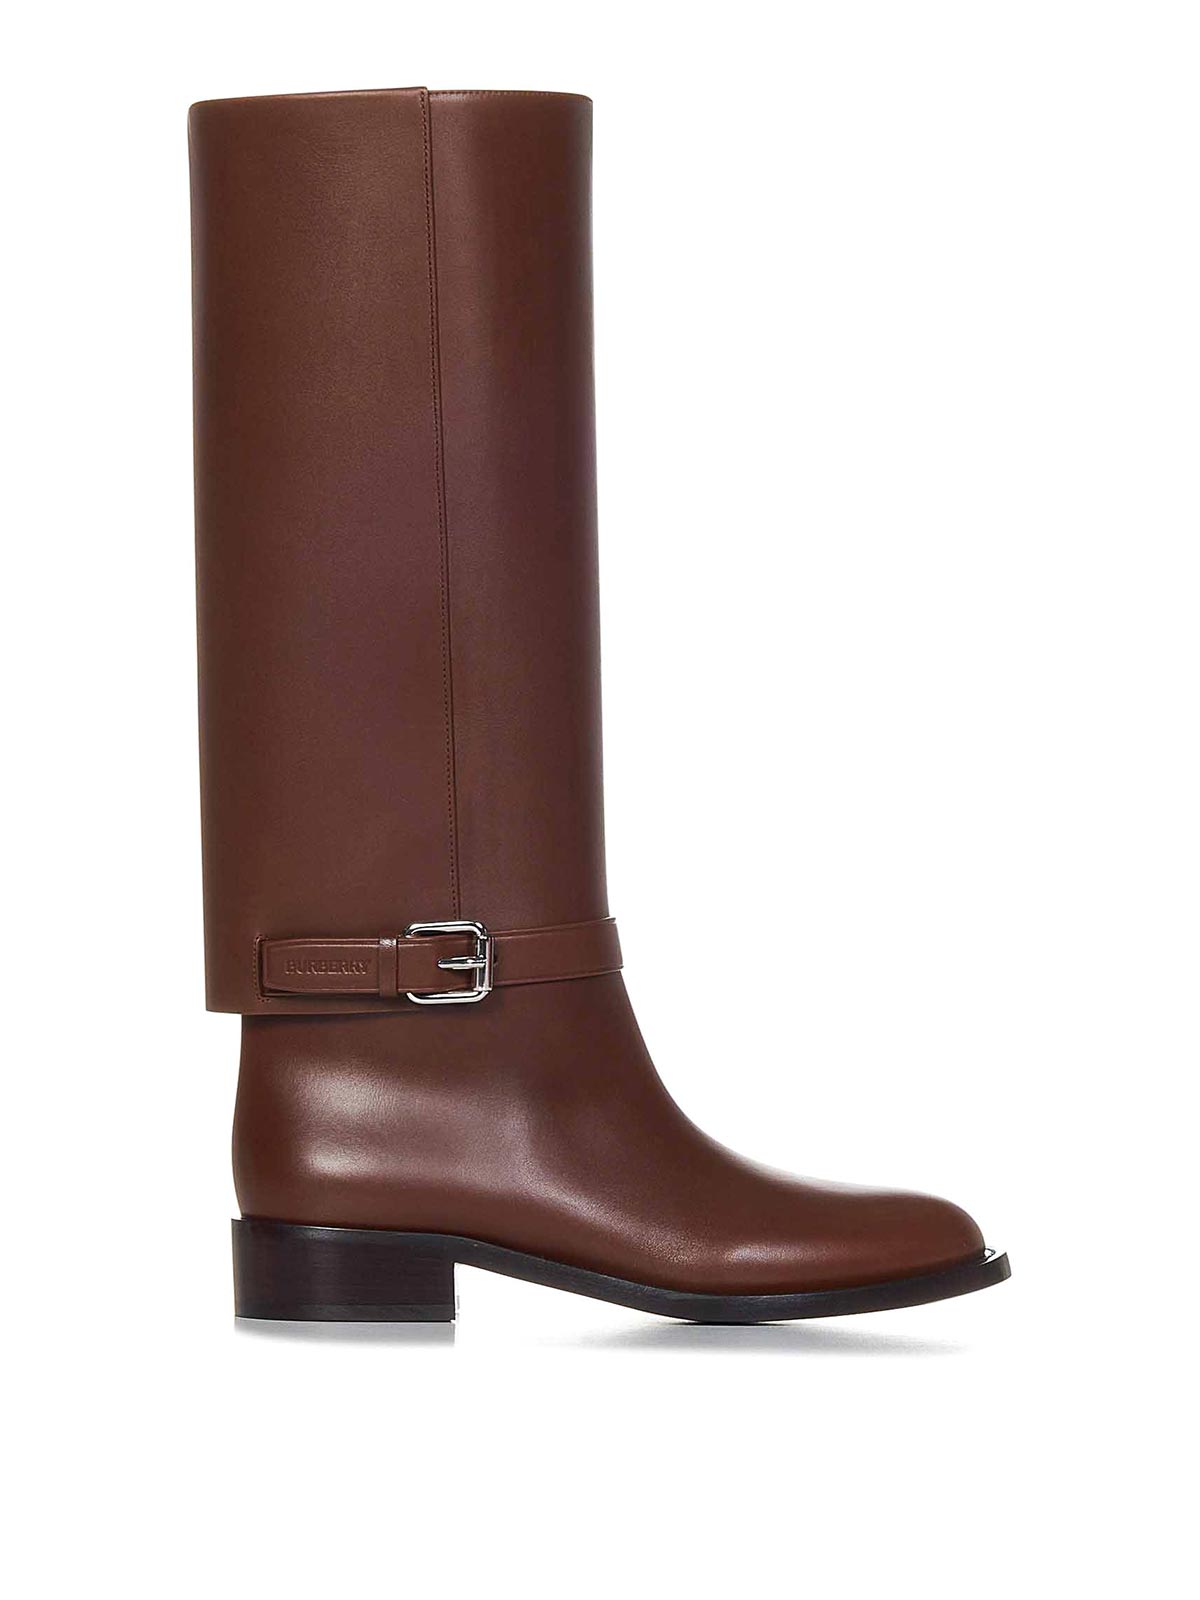 BURBERRY EQUESTRIAN BOOTS WITH ANKLE STRAP